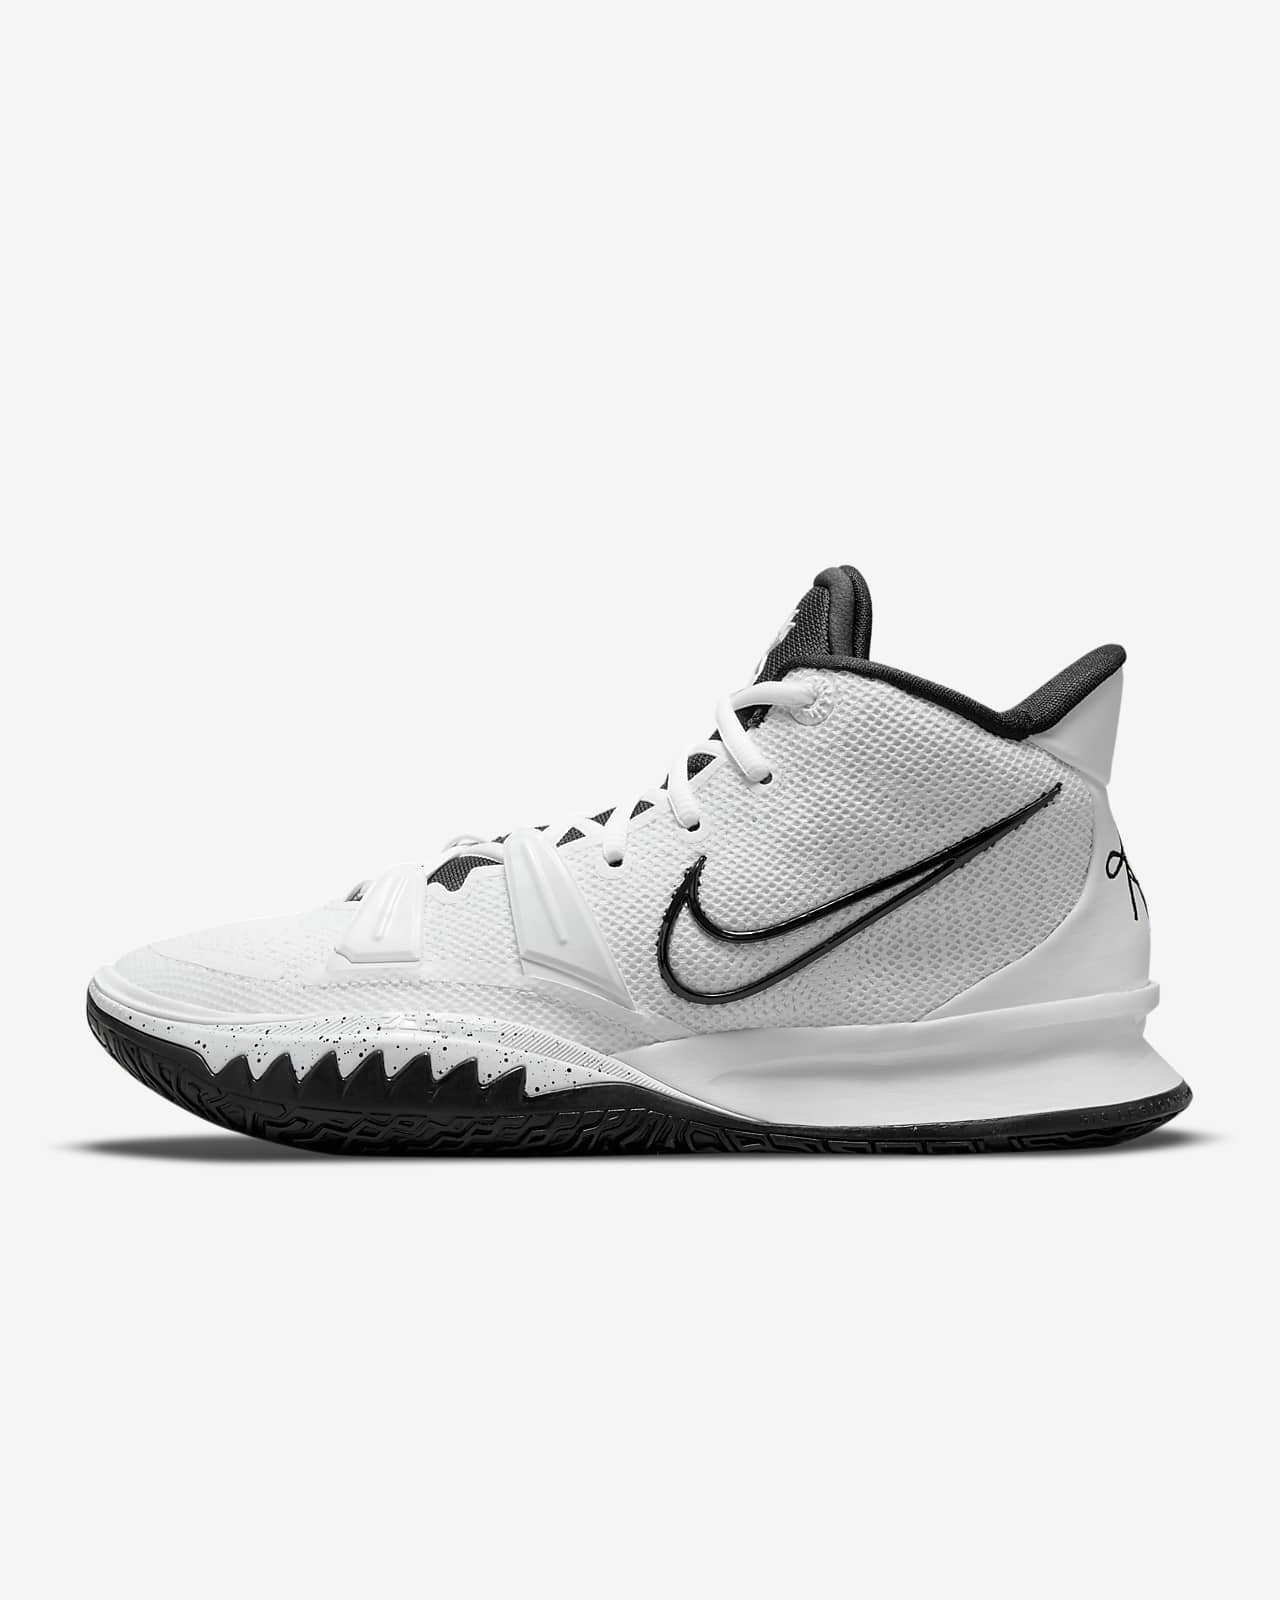 kyrie irving game 7 shoes